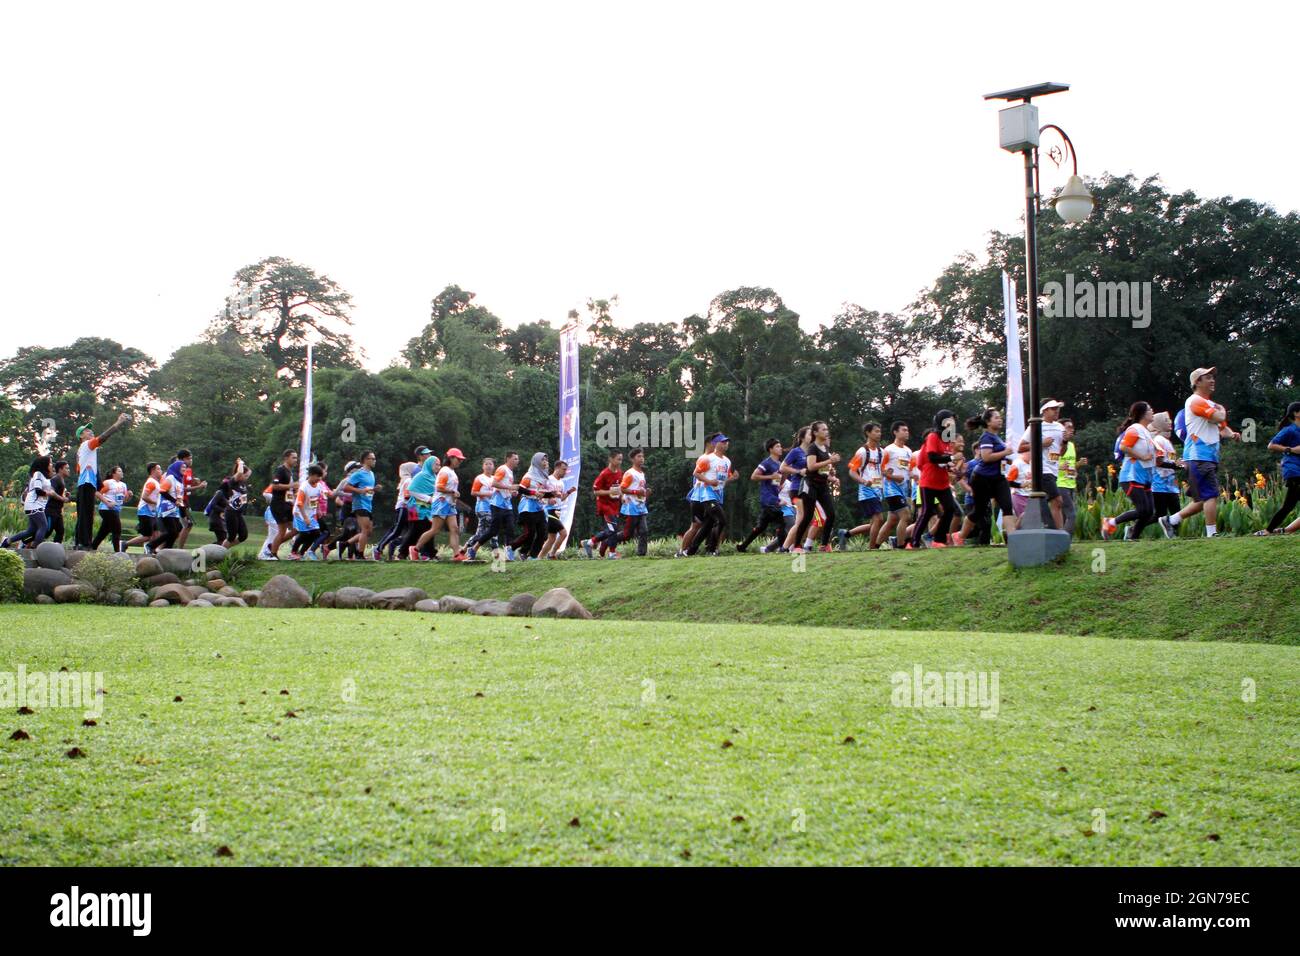 a photo of a marathon running competition held by one of the Indonesian government banks. Stock Photo